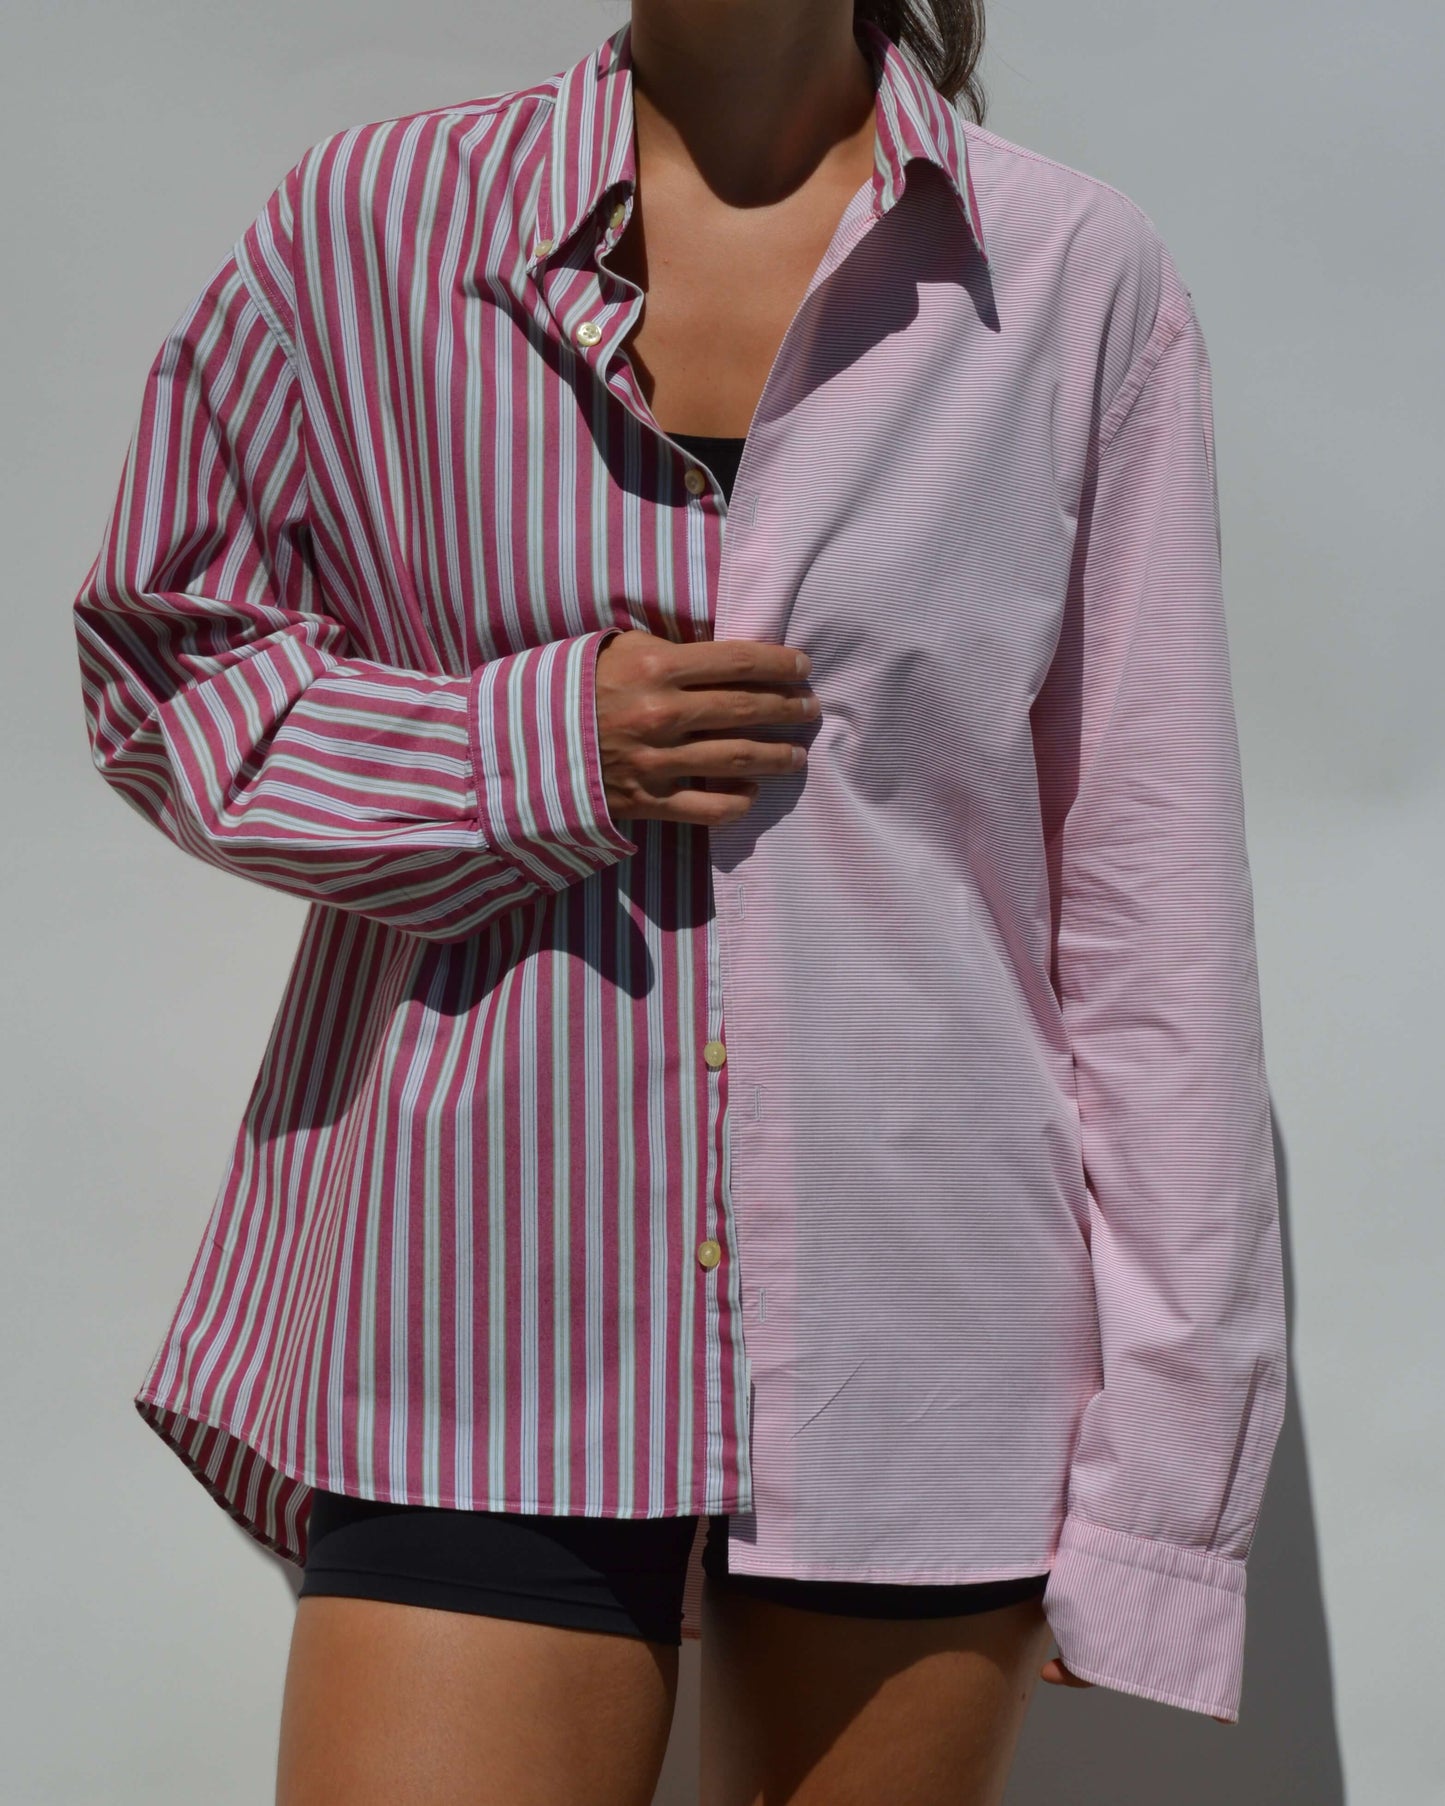 DUO Shirt - Pink Perfection (S/L)